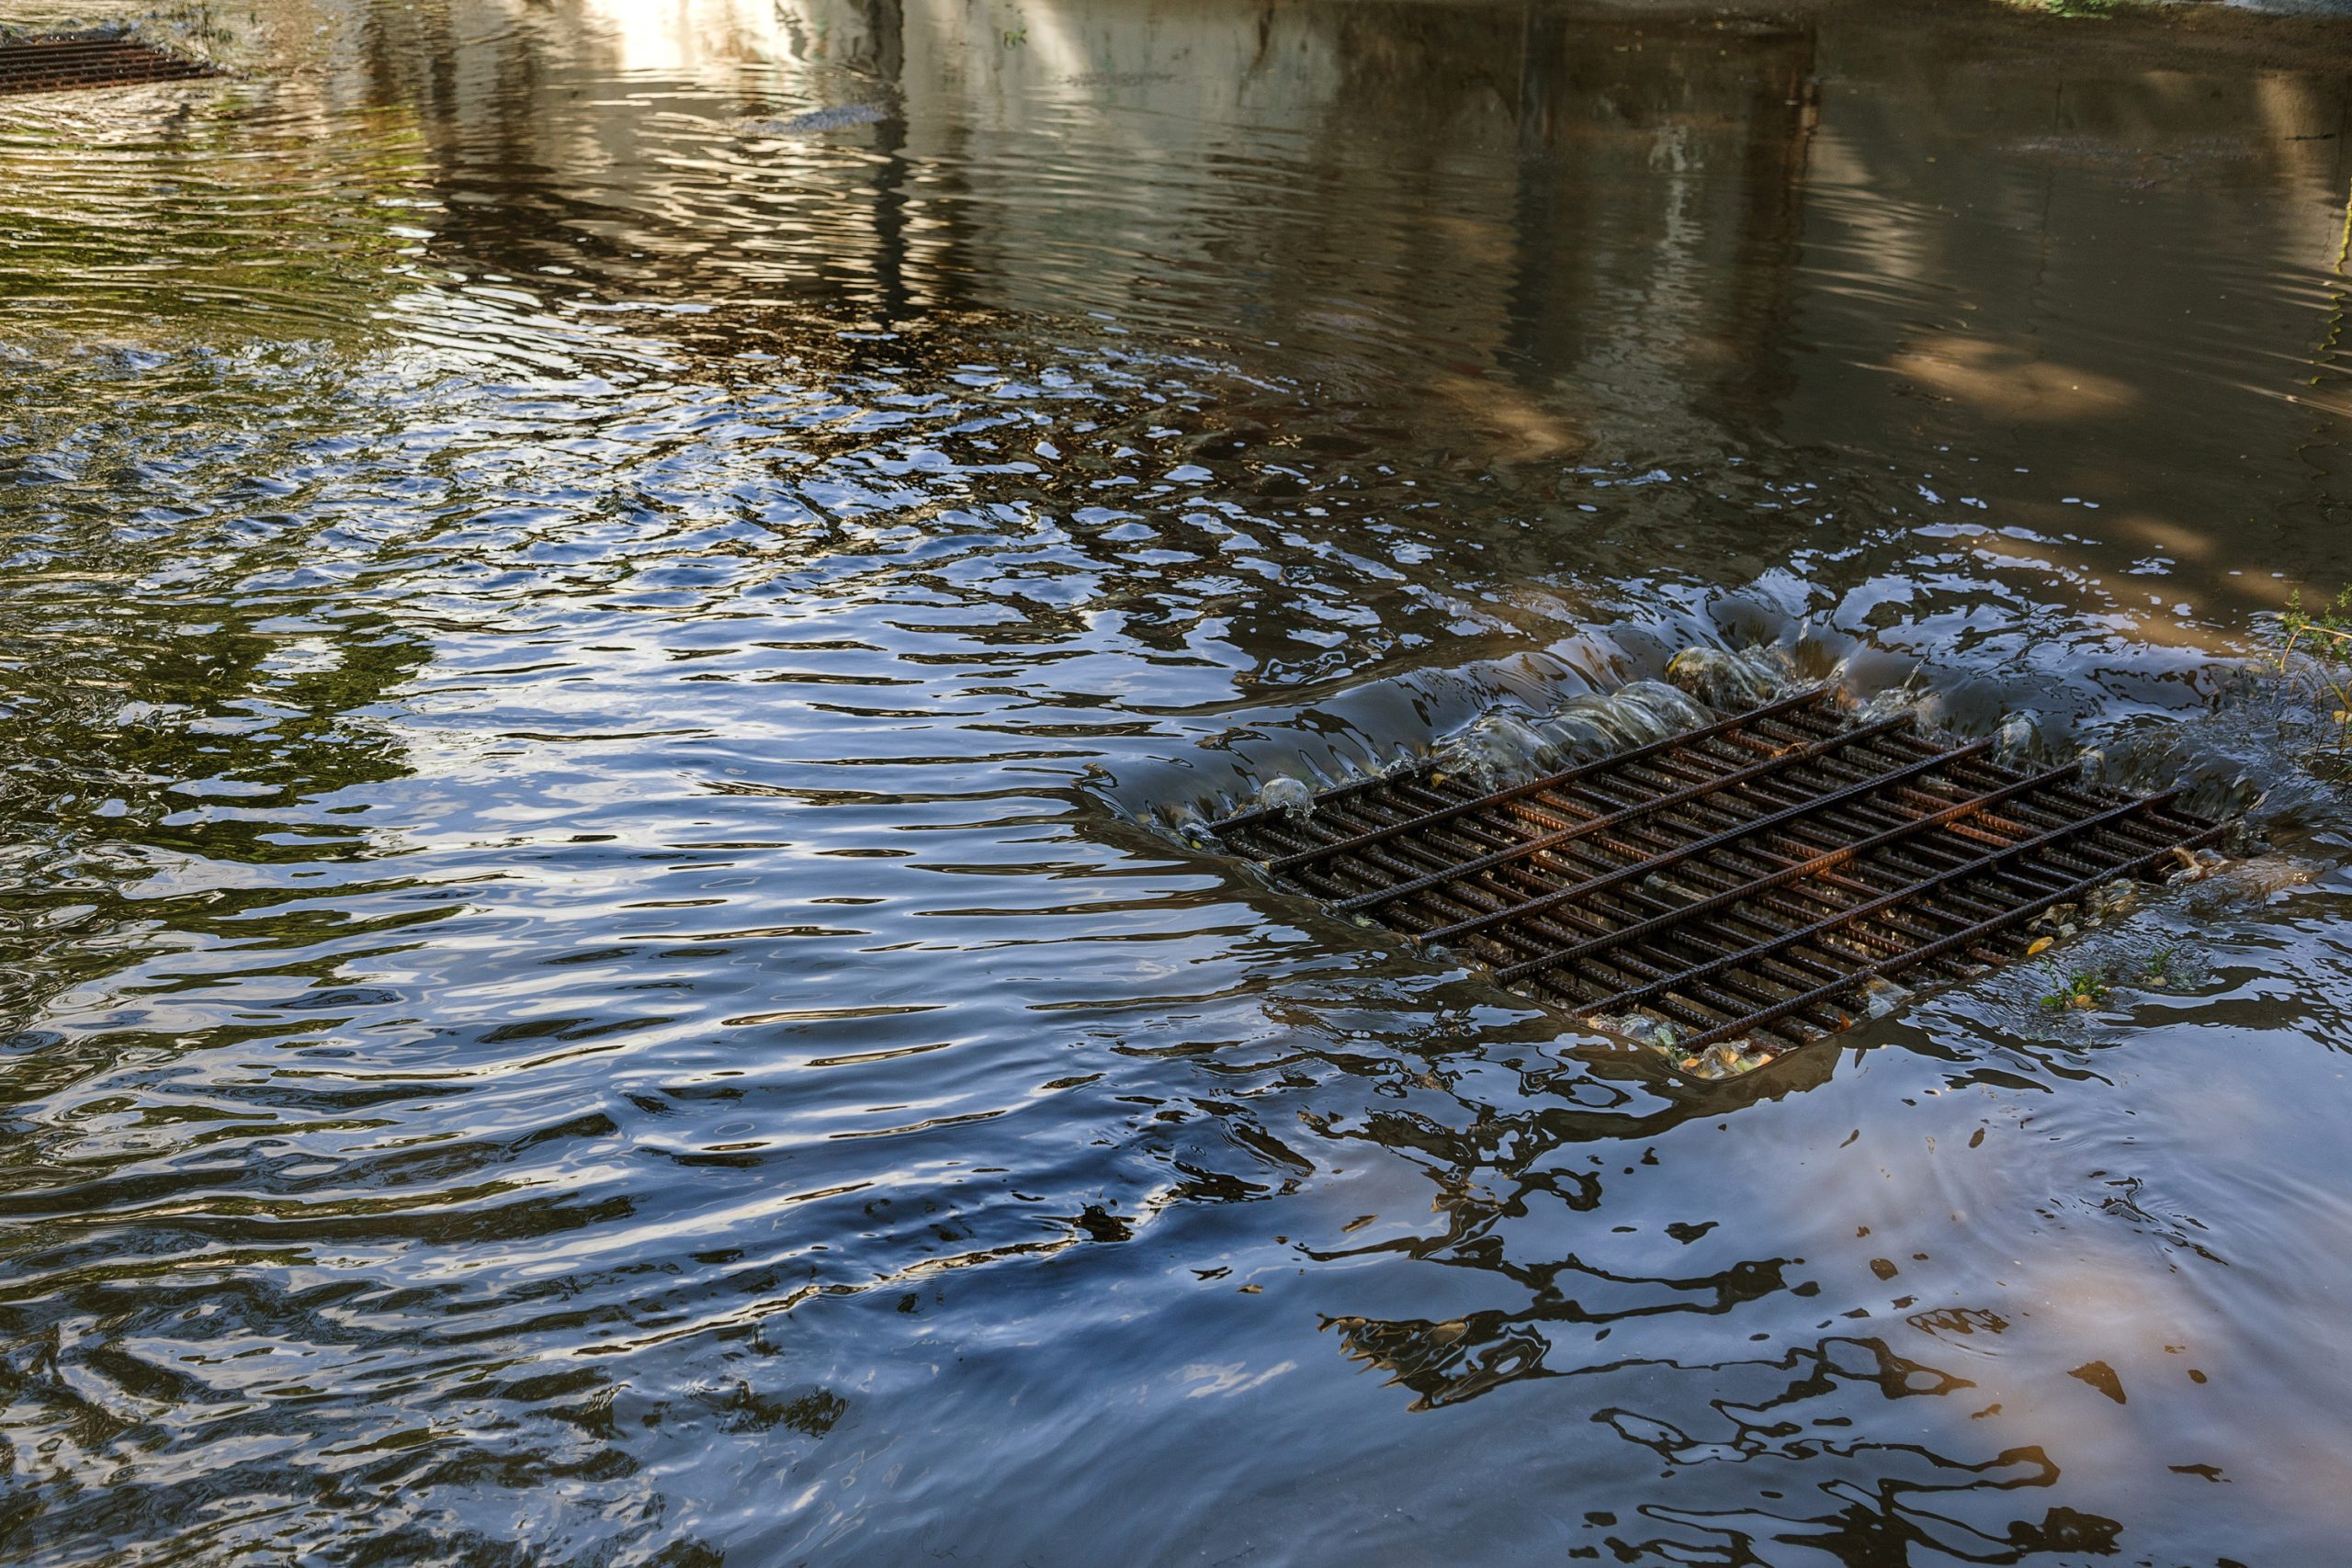 Water flows into a sewer grate during a heavy rain.